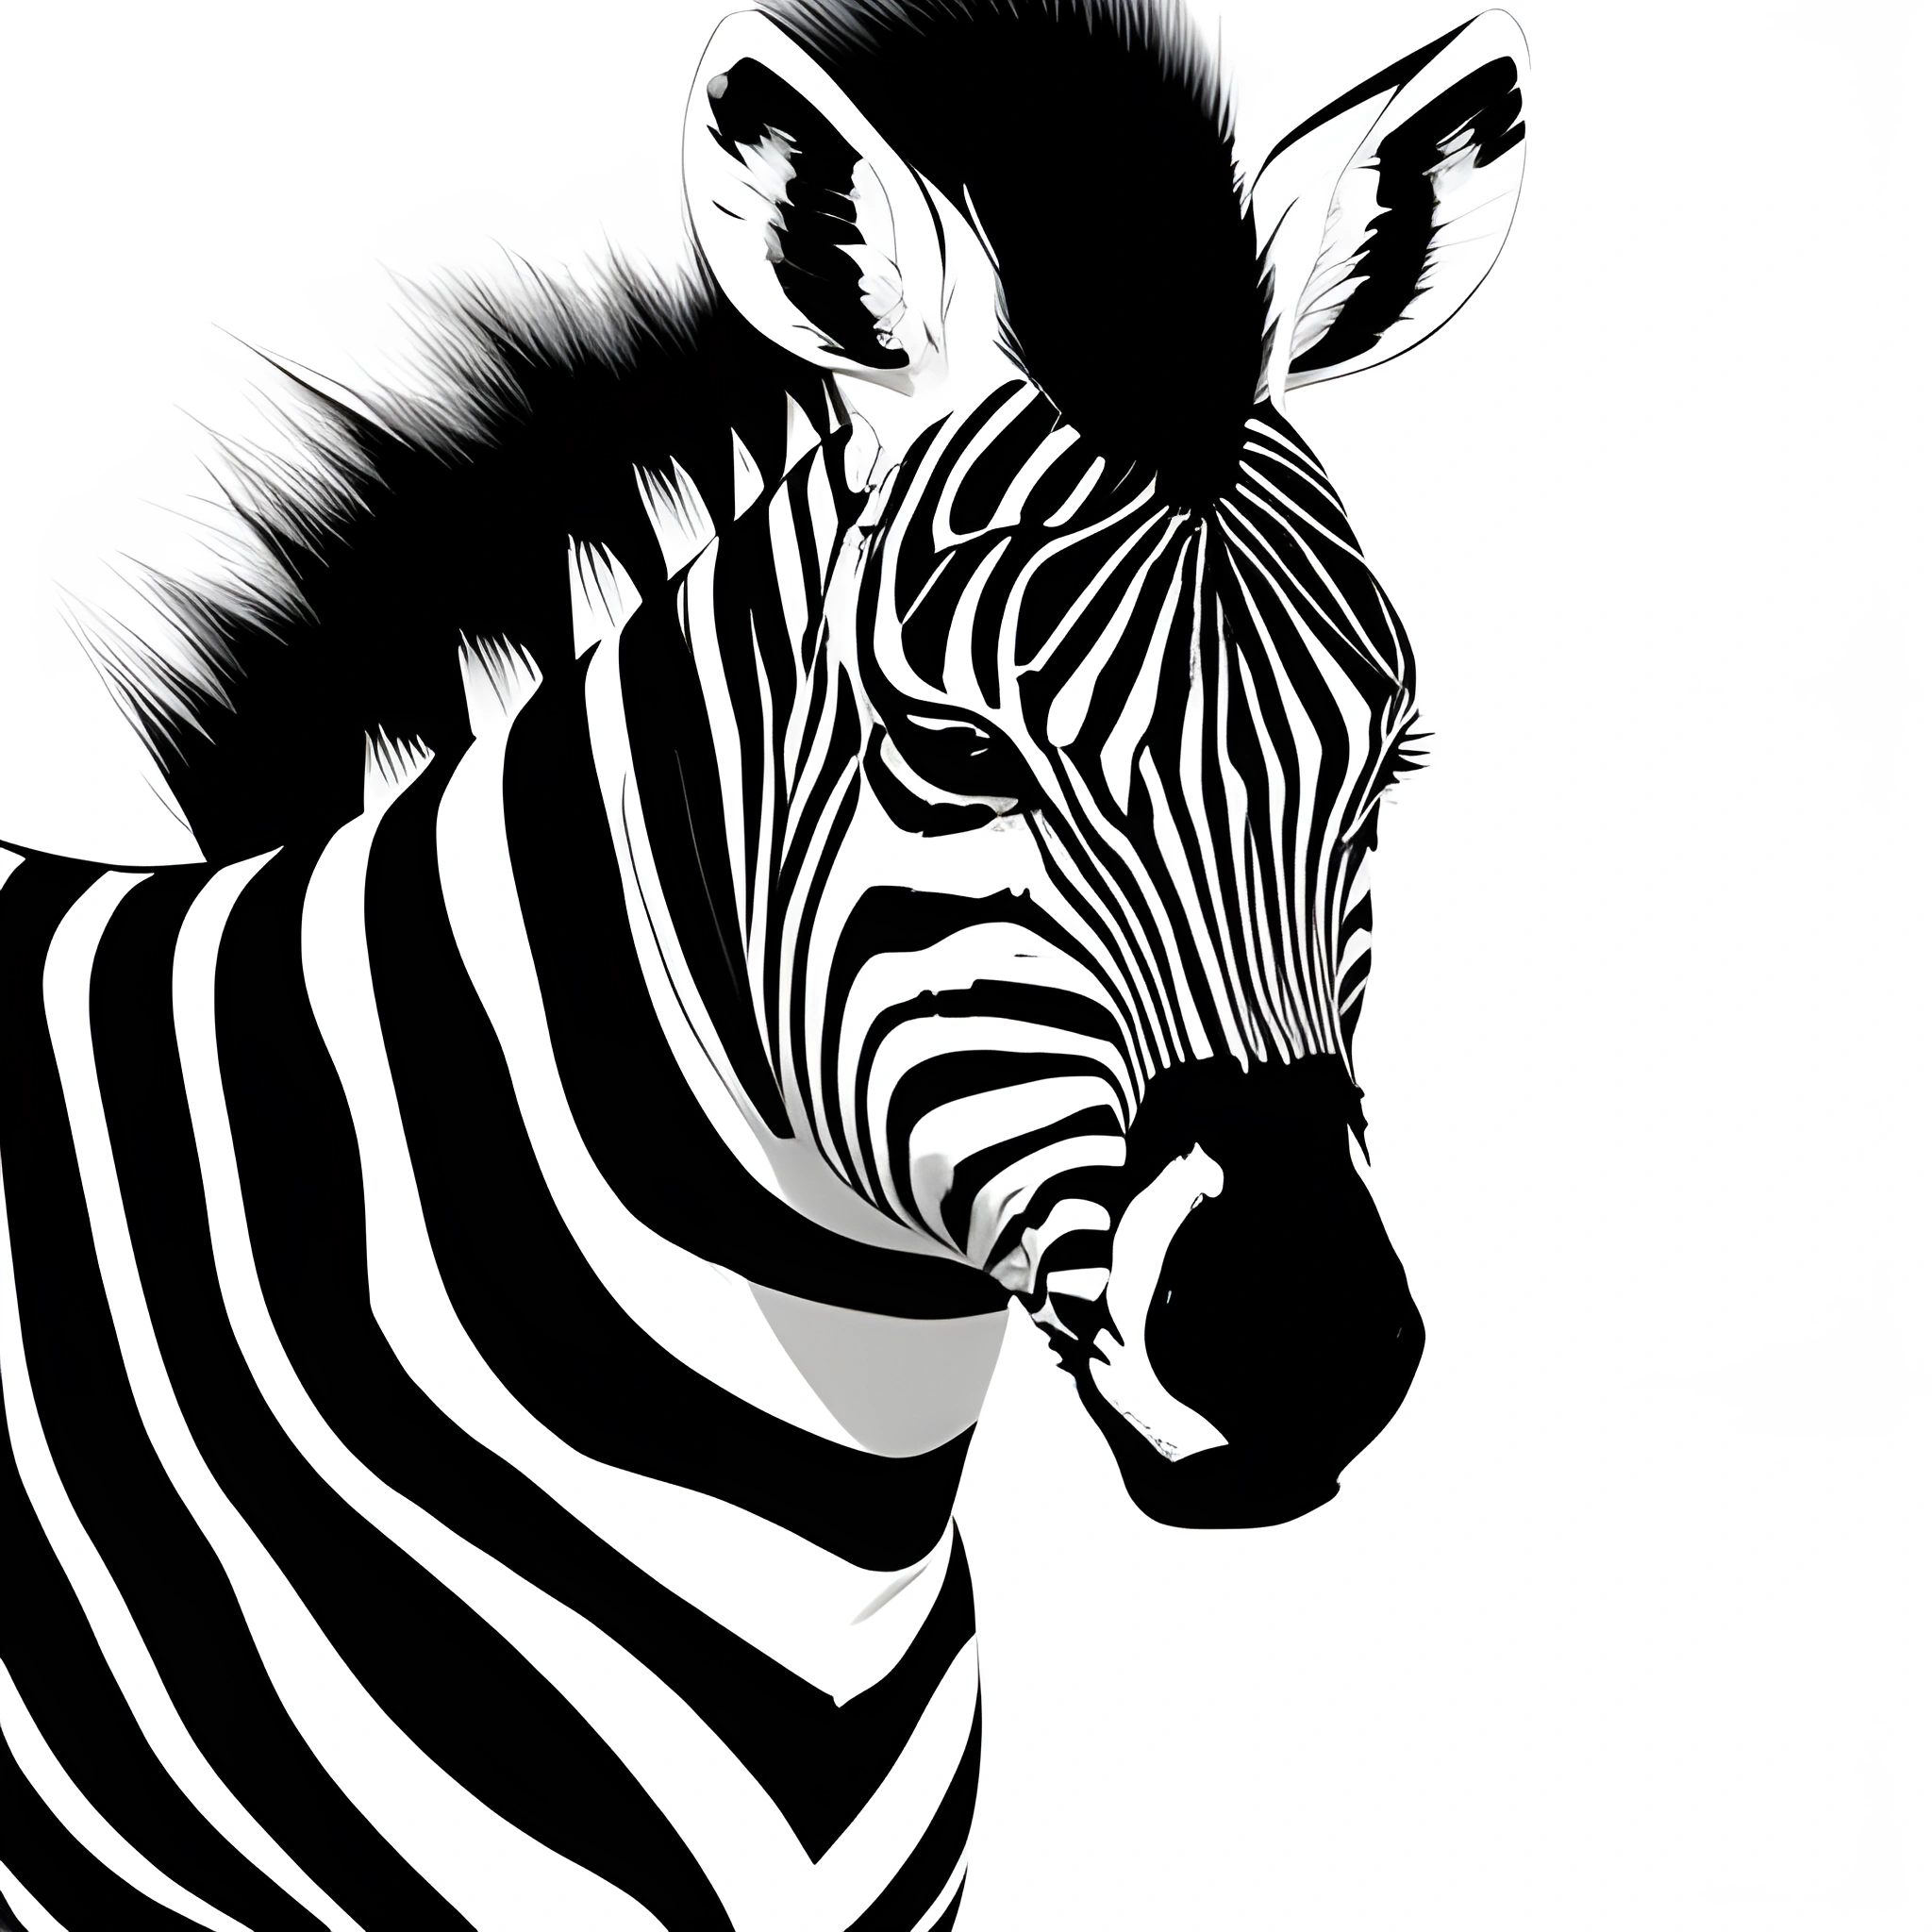 zebra with black and white stripes standing in front of a white background